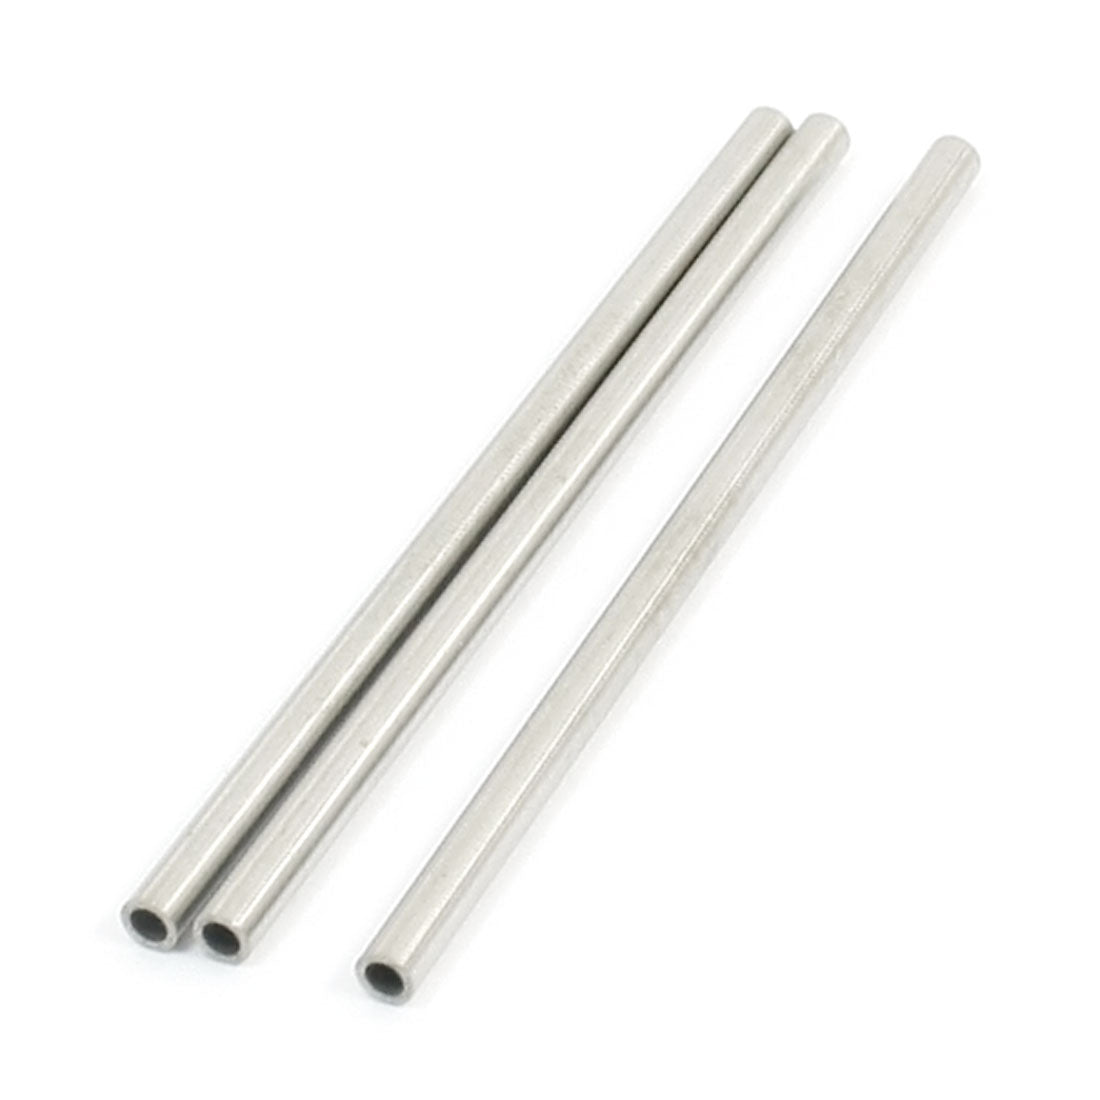 uxcell Uxcell 3Pcs Transmission Stainless Steel Welded Round Tubing Rods 70 x 3mm